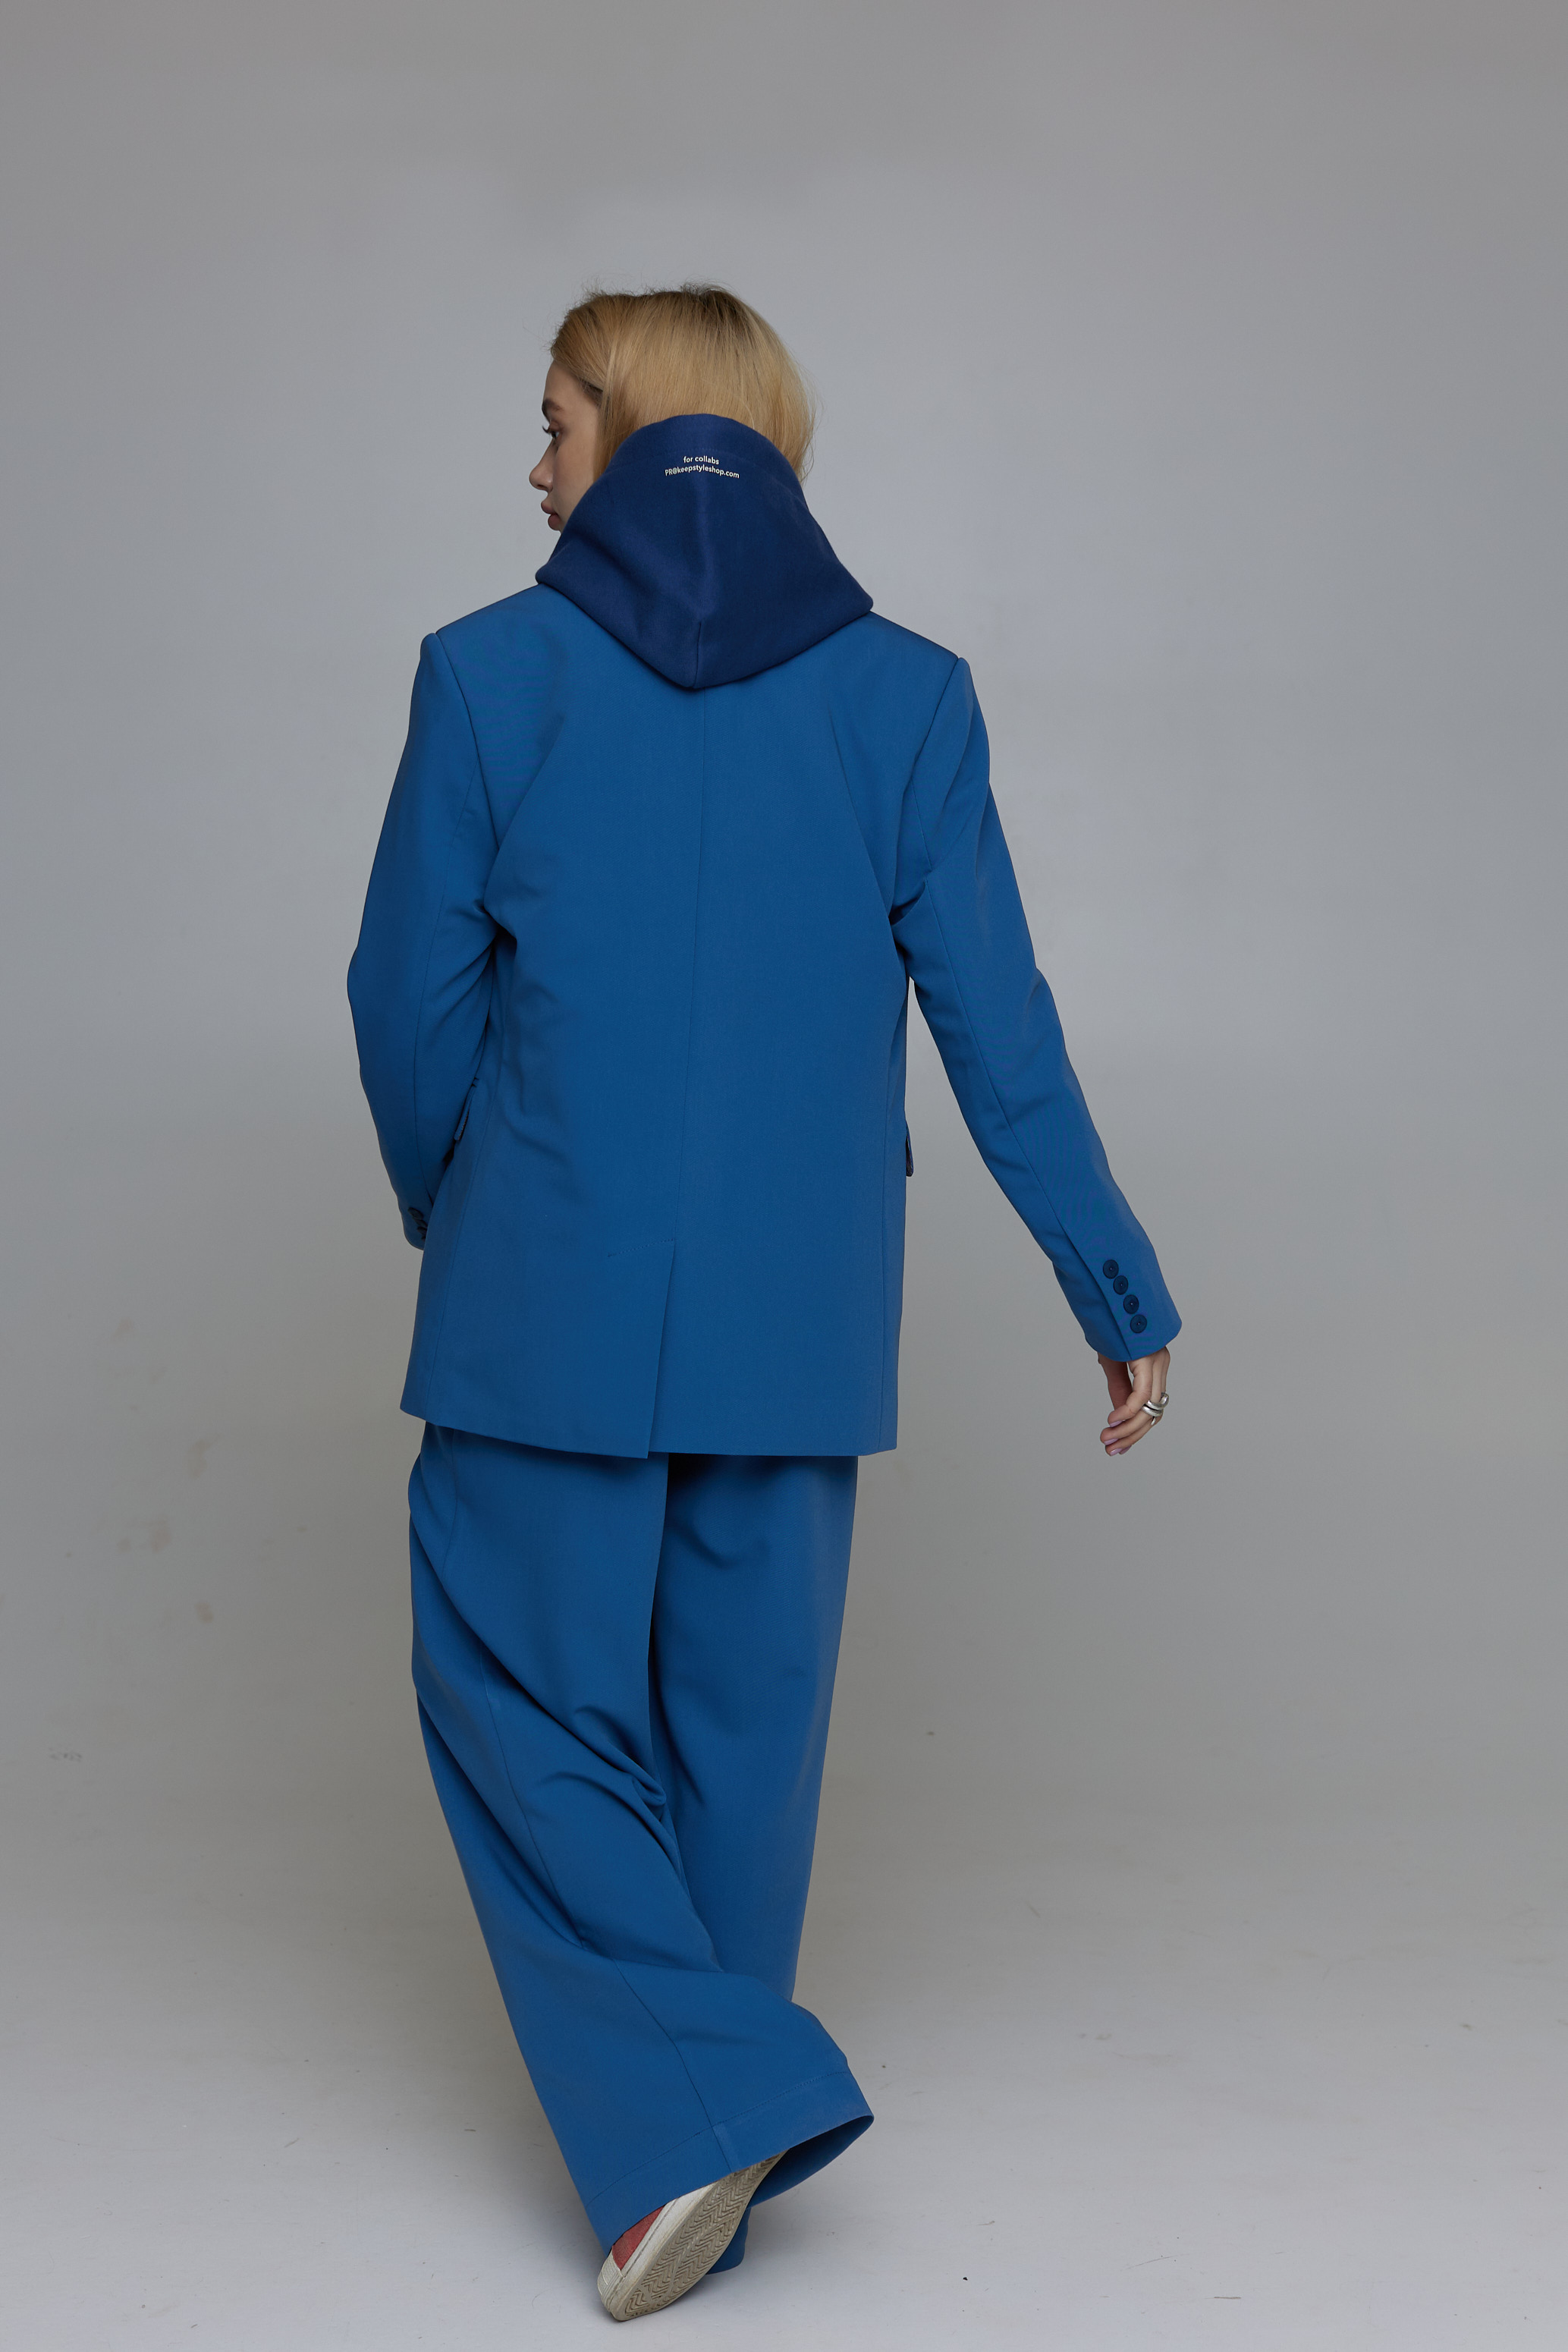 day`n`night suit in blue color